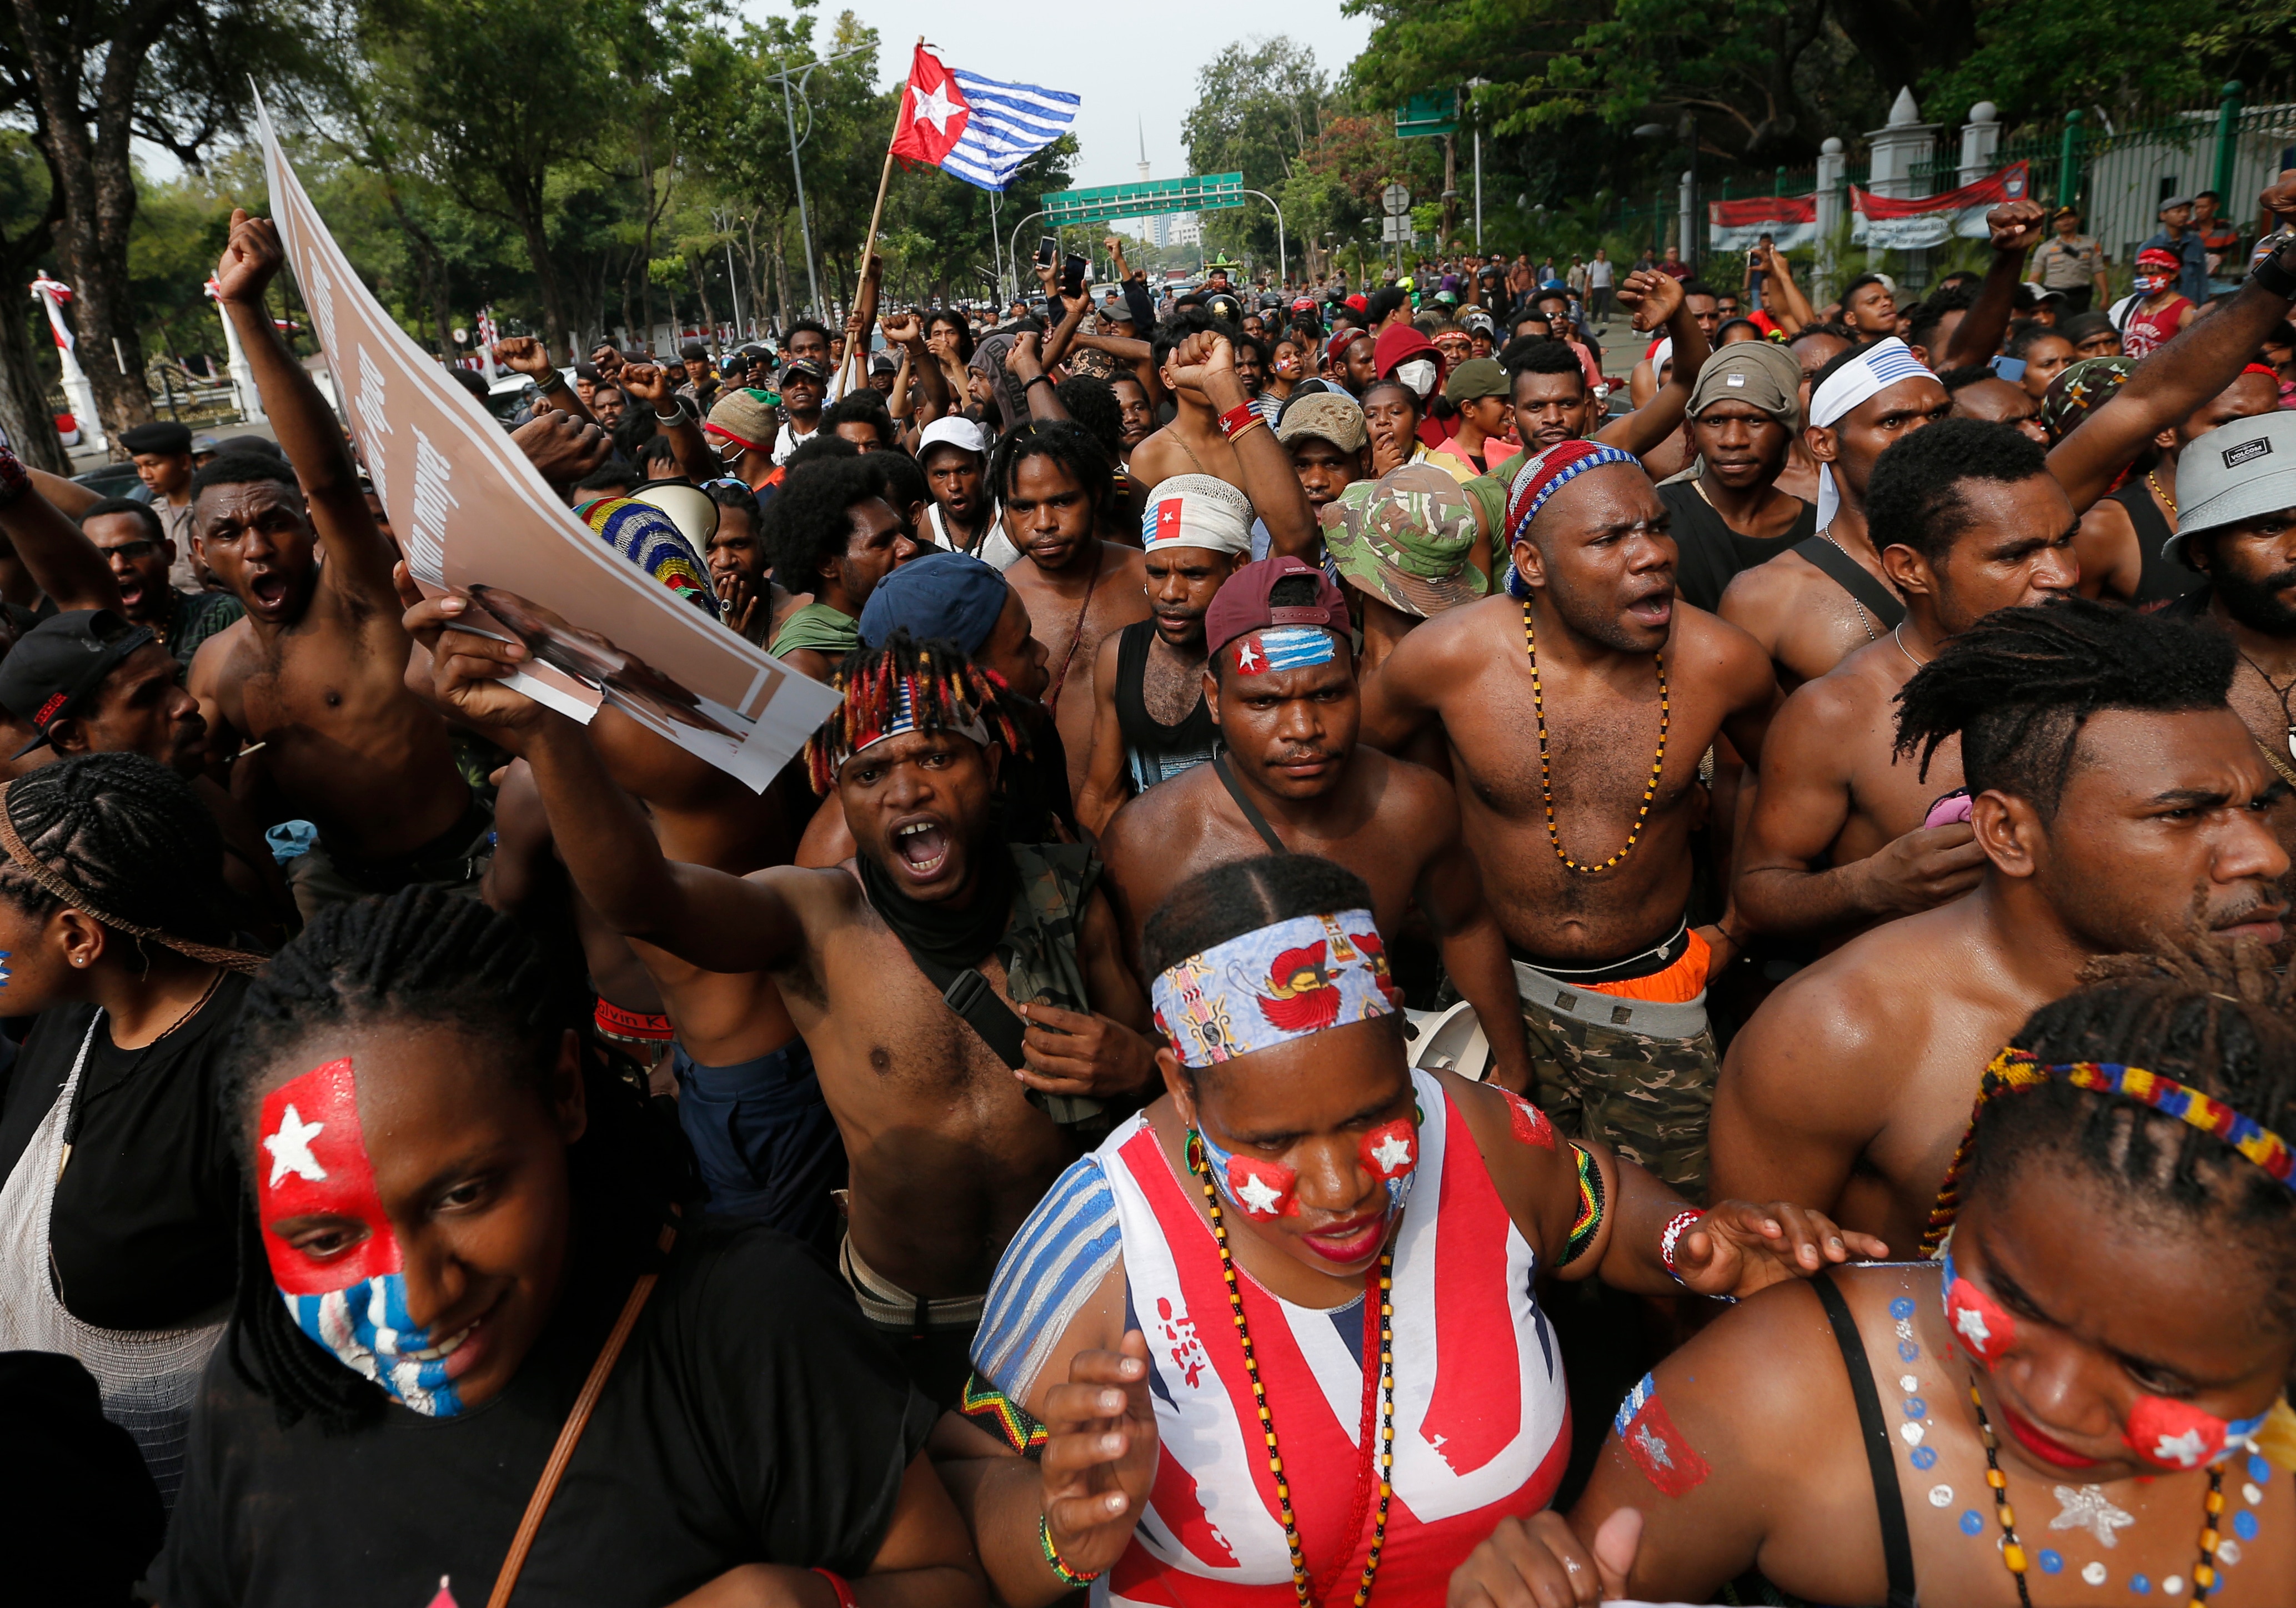 Papuan students shout slogans during a rally near the presidential palace in Jakarta, Indonesia, Wednesday, Aug. 28, 2019.